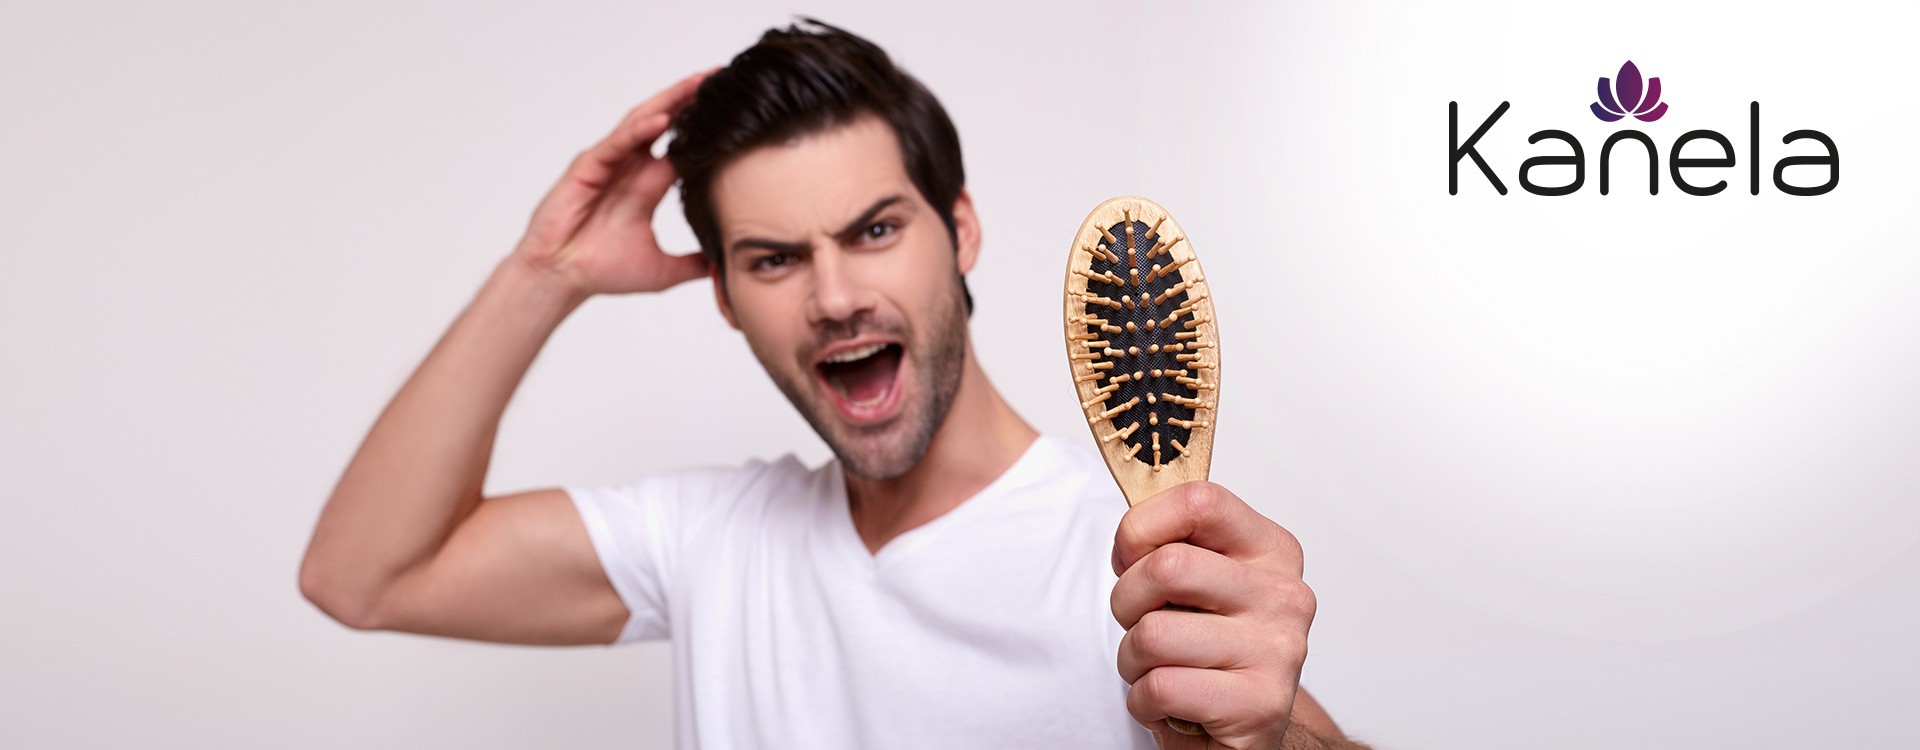 What helps against hair loss?